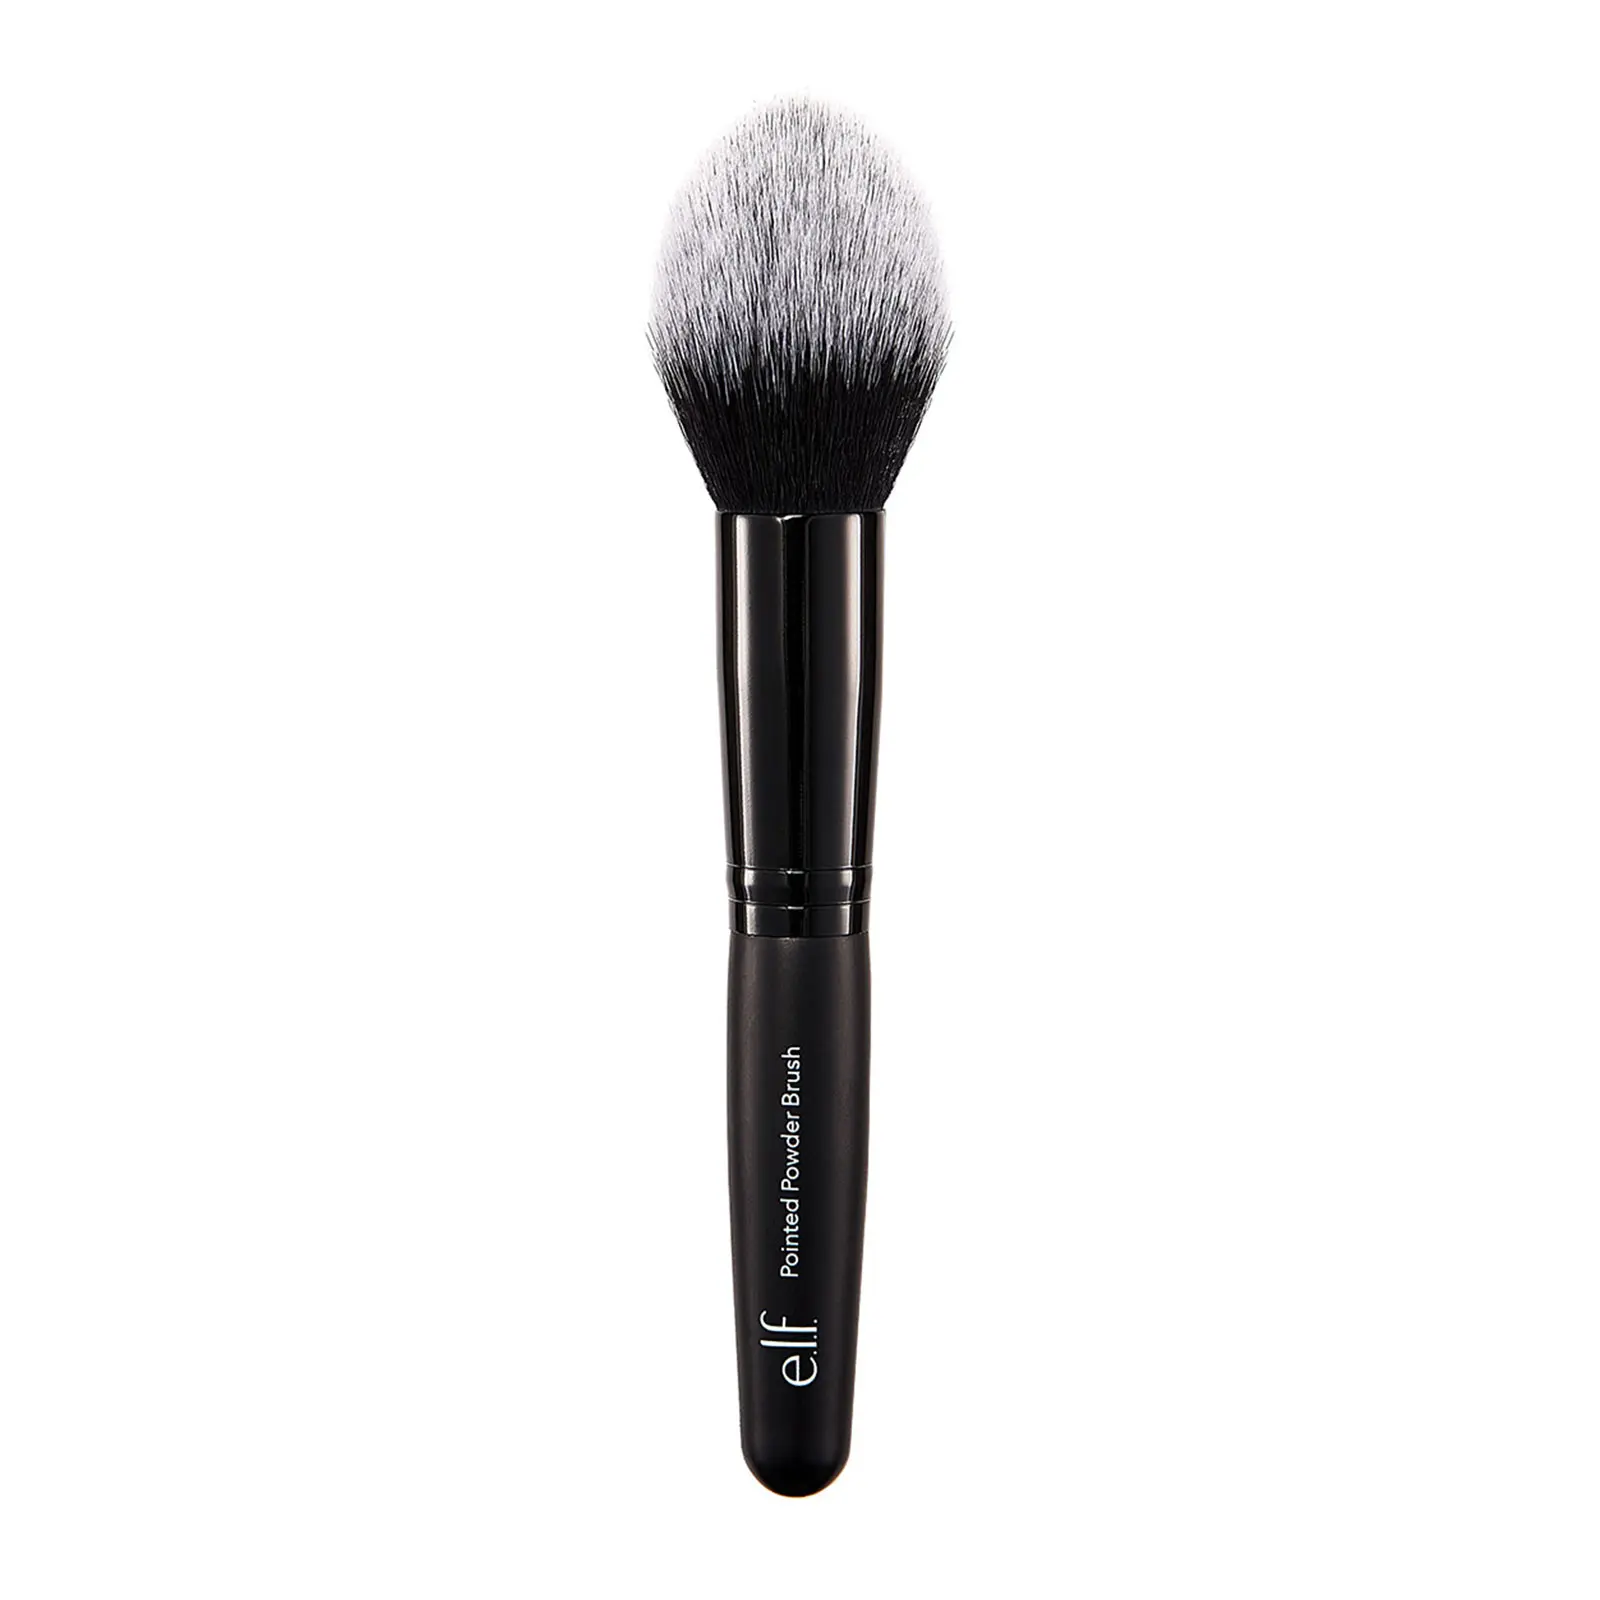 e.l.f. Pointed Powder Brush Discounts and Cashback